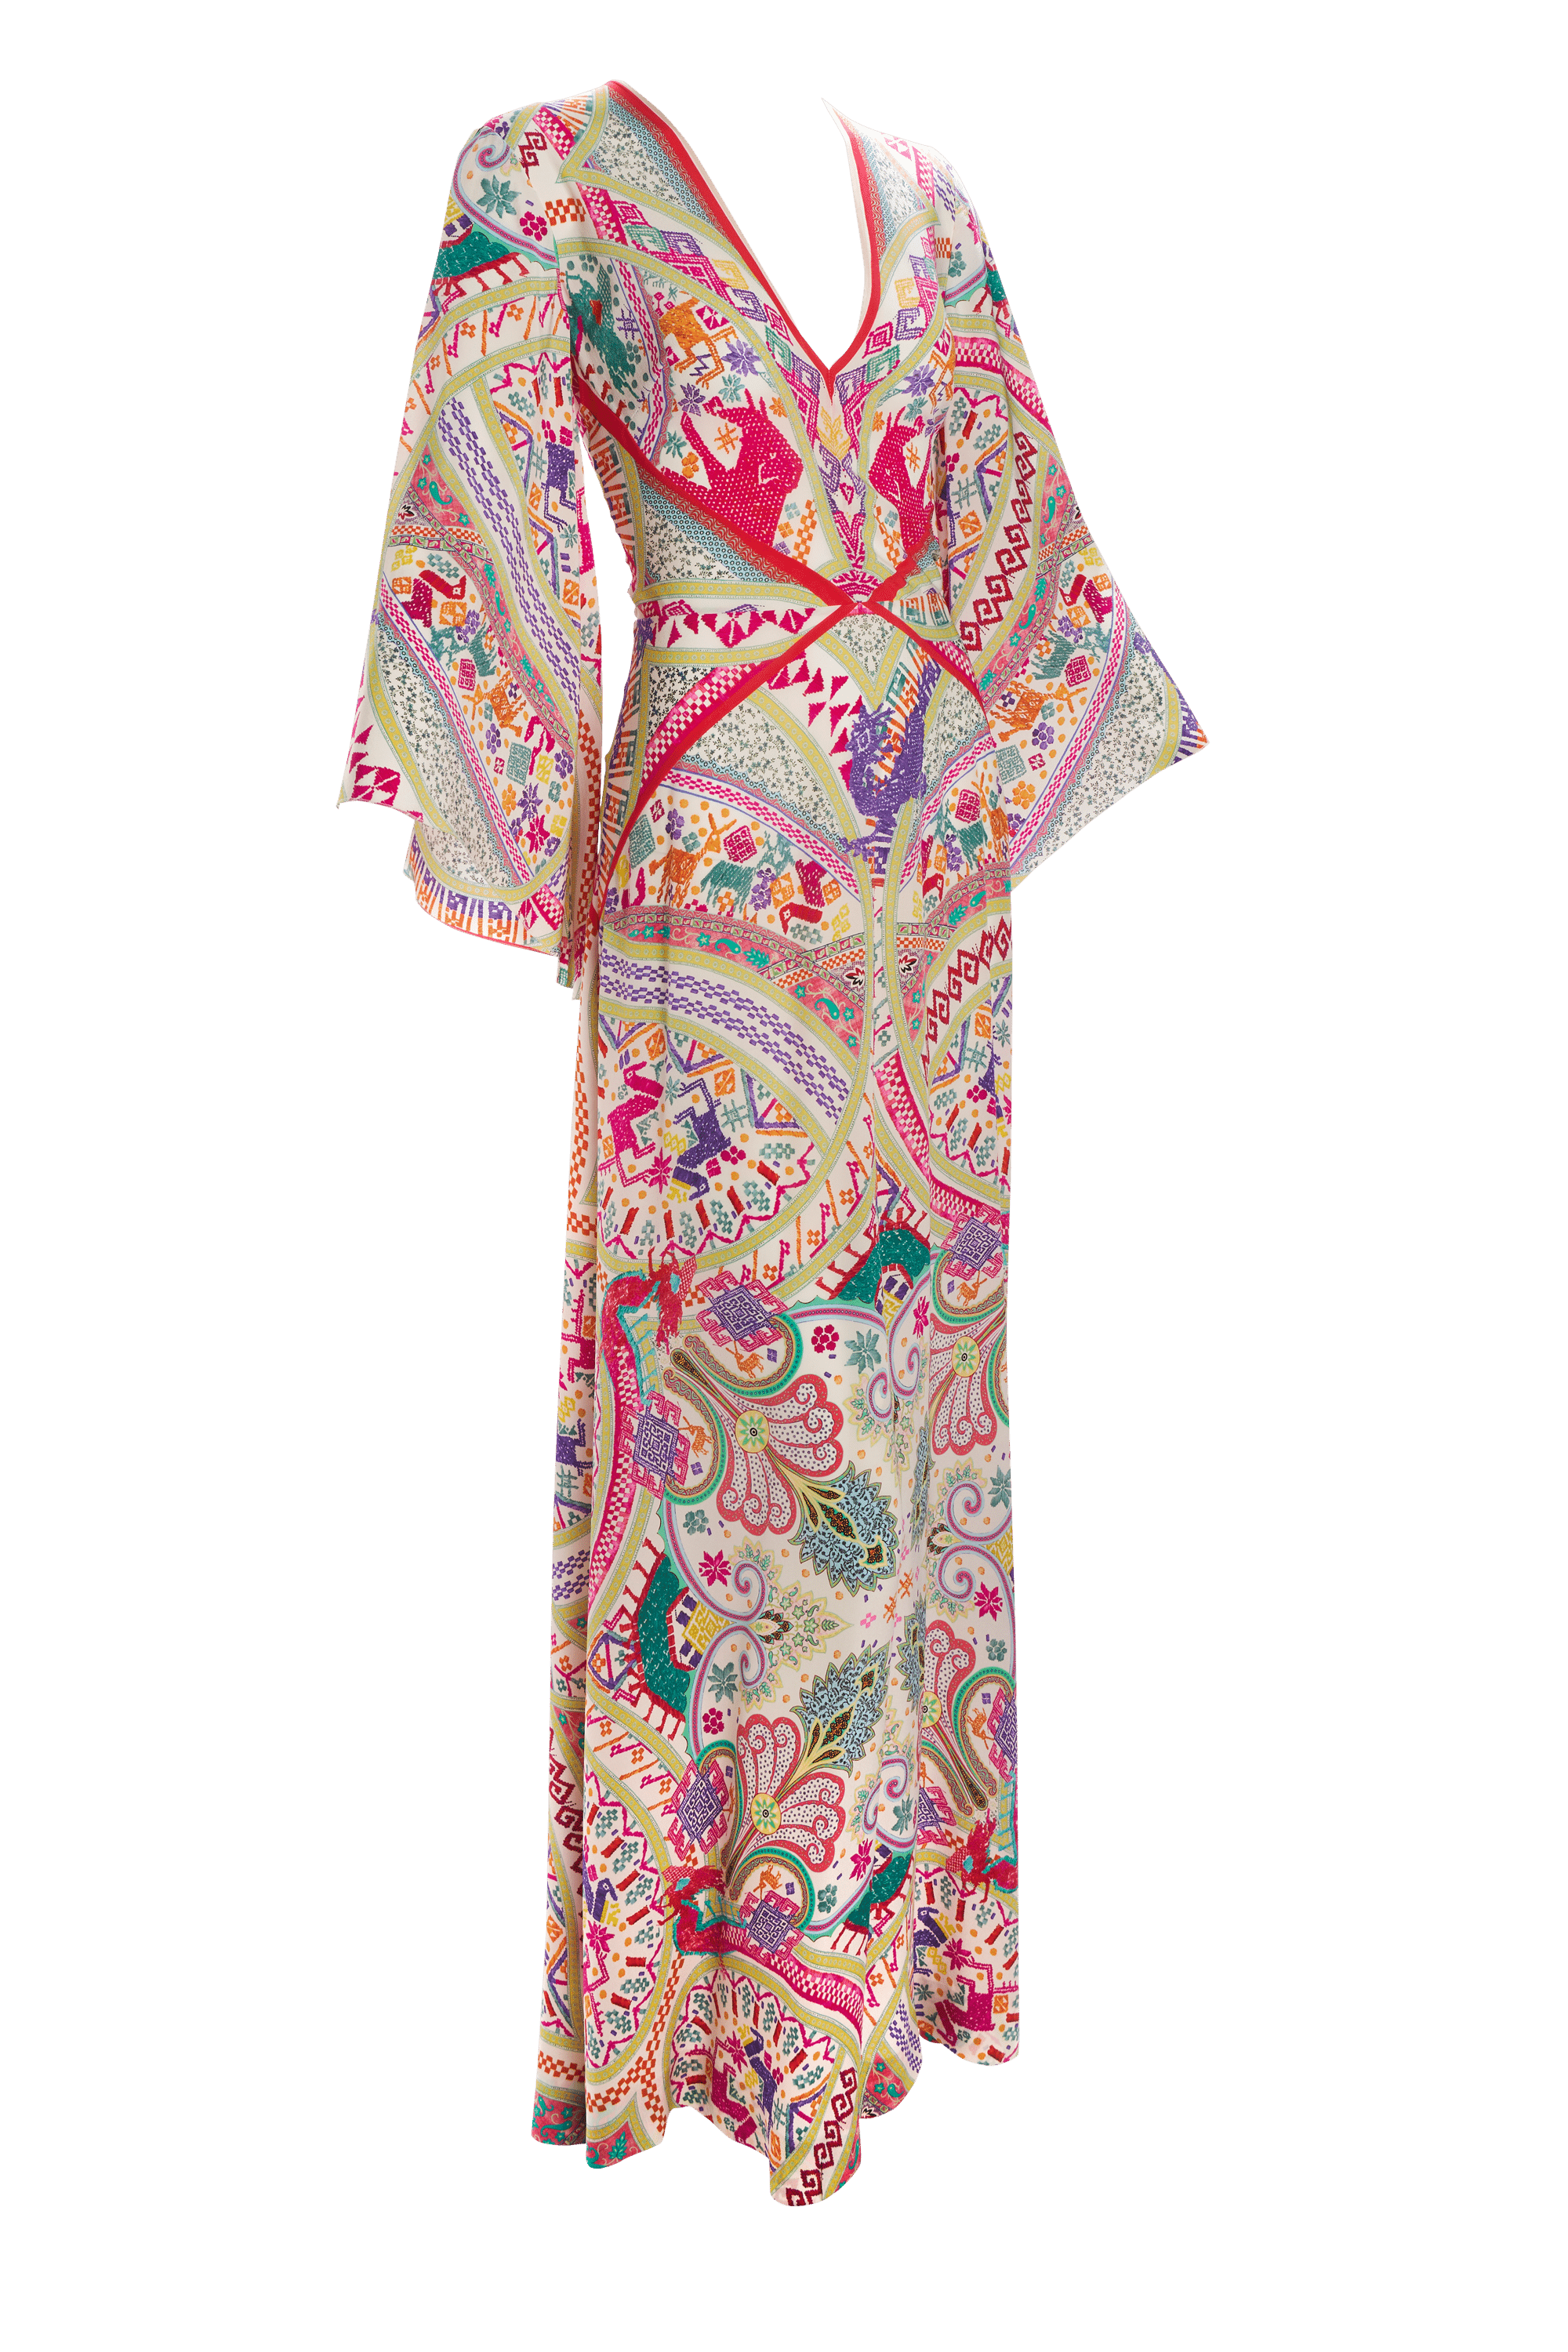 Etro World Travels Cross Hatched Print Maxi Dress - Foxy Couture Carmel